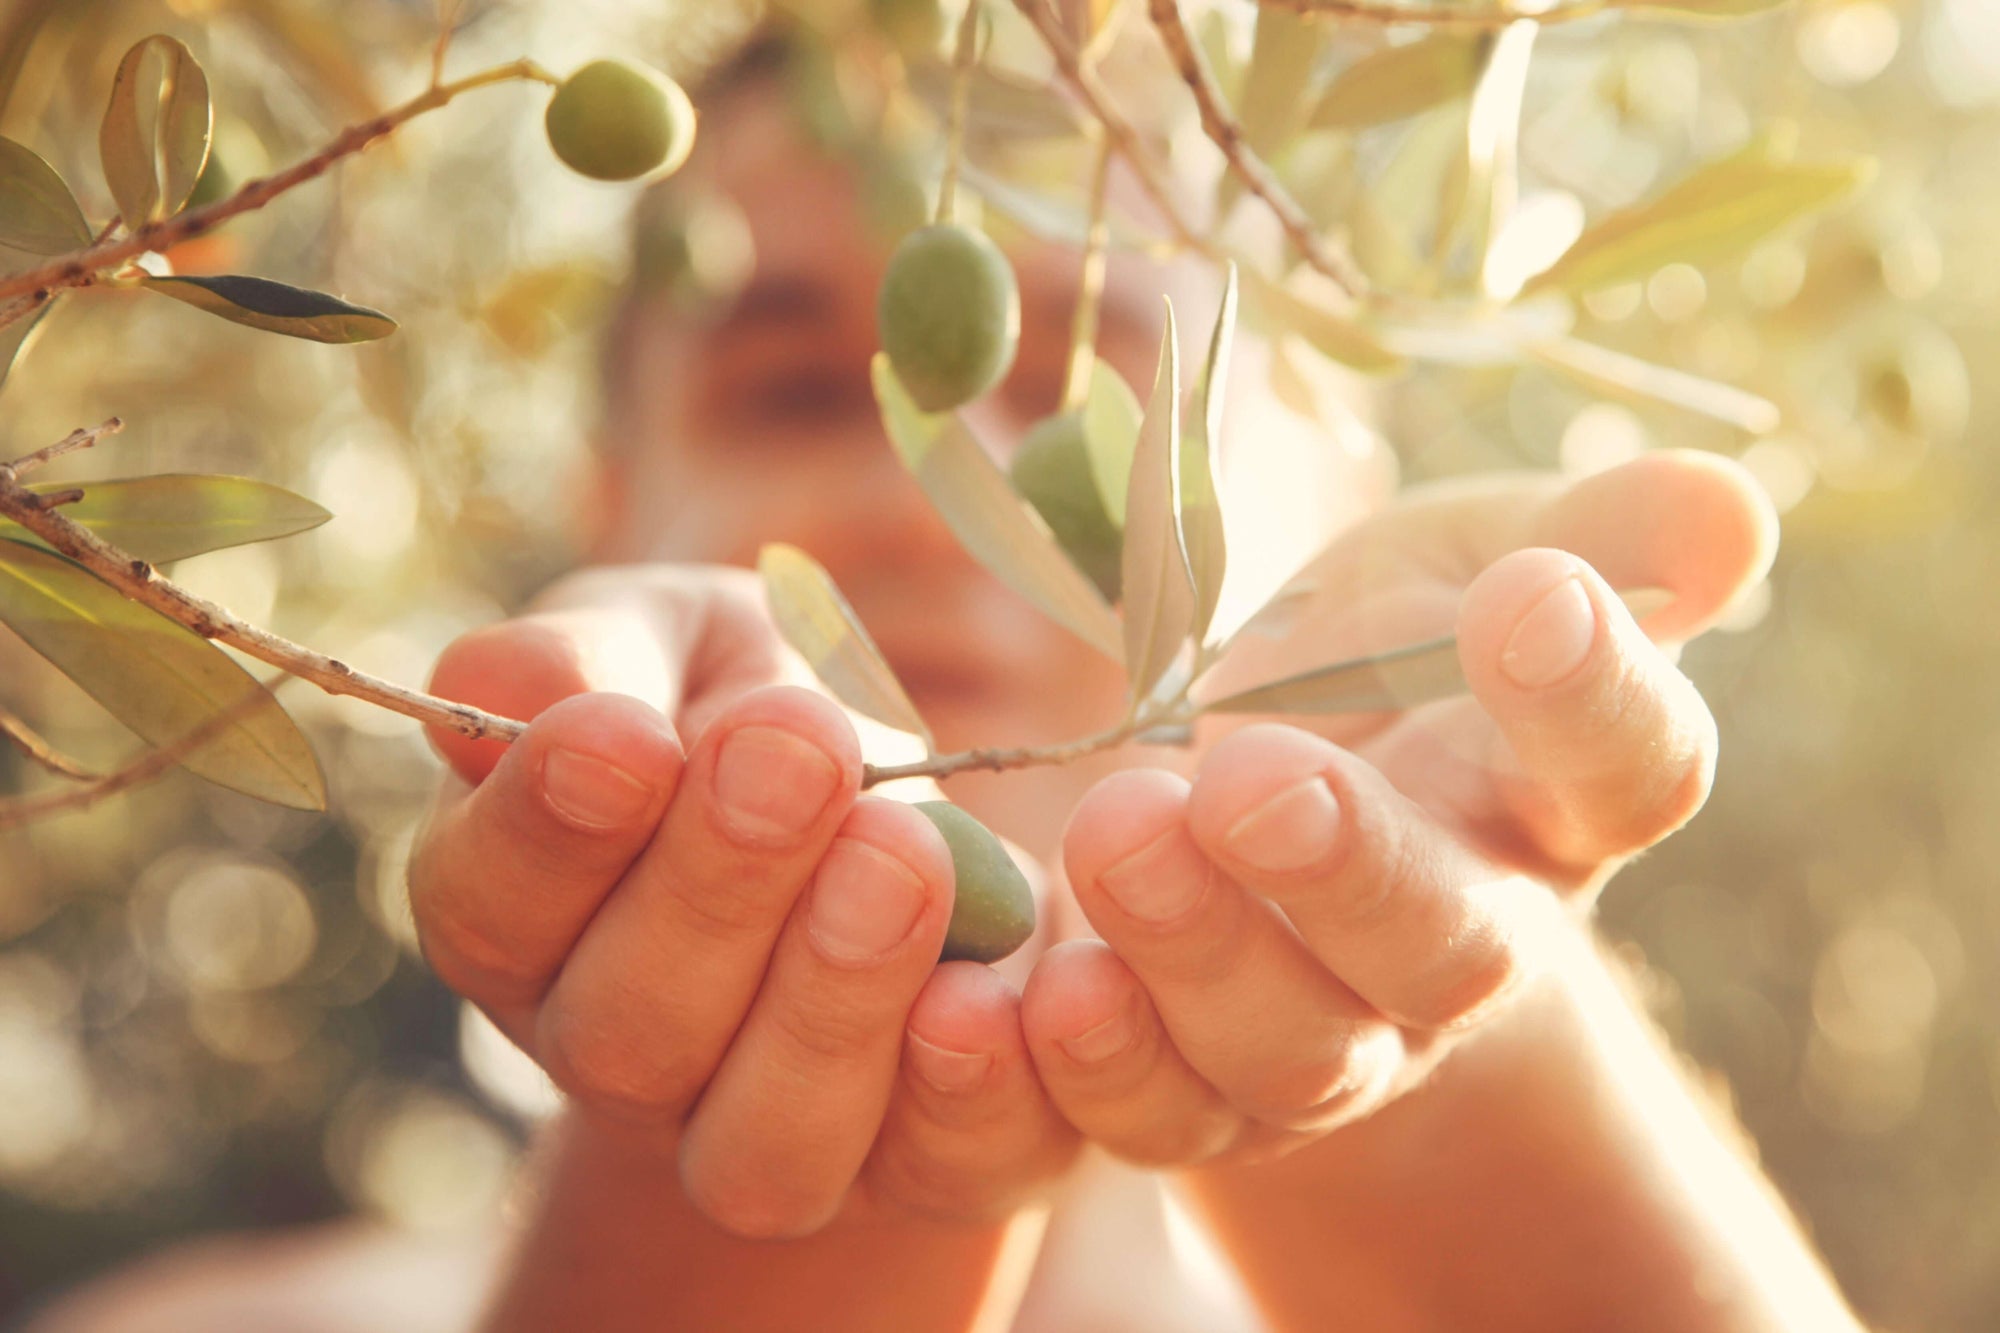 Polyphenols: What are they, and why does their presence in EVOO matter? - Ilias and Sons